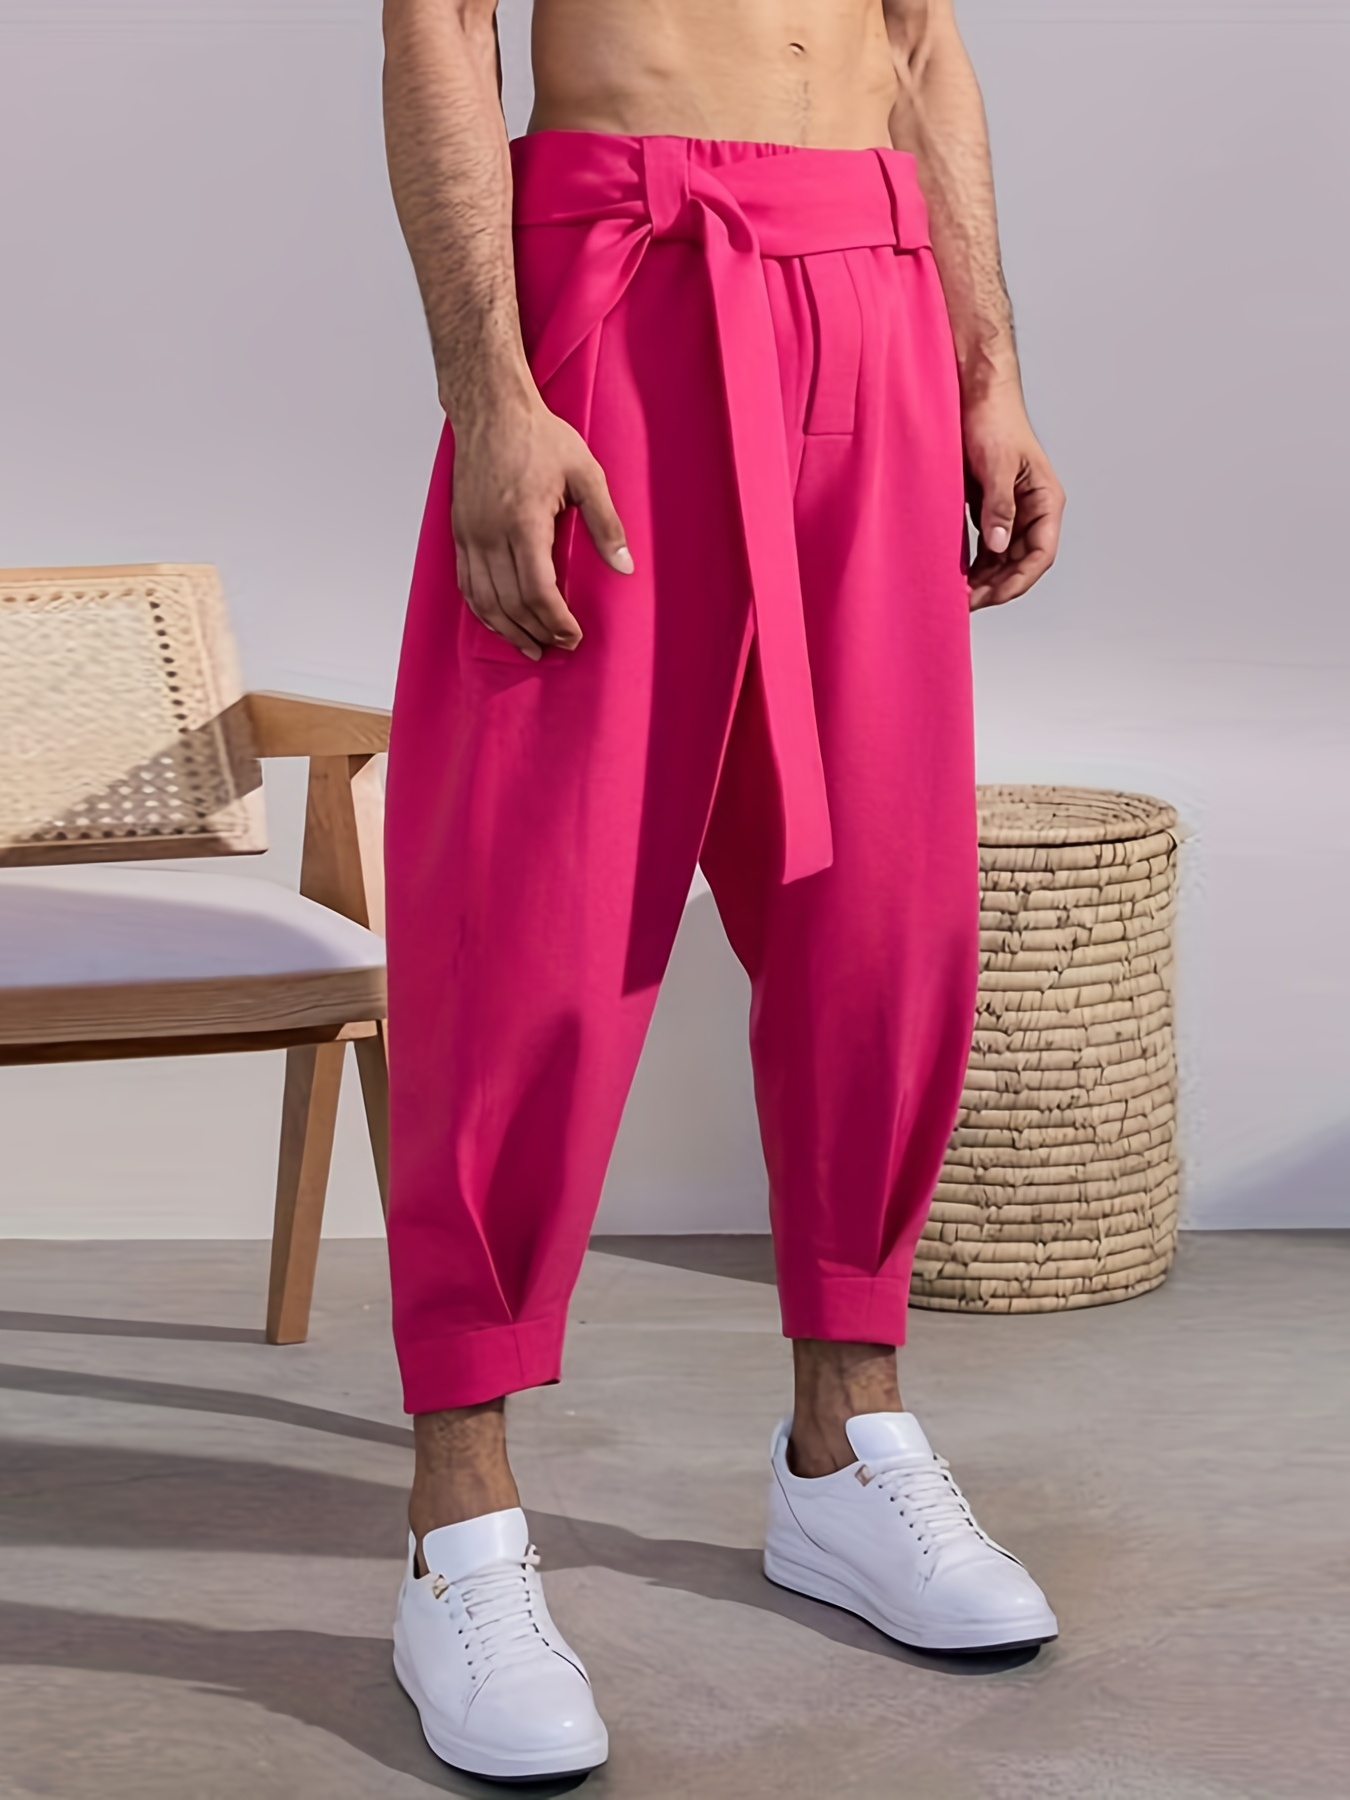 Men straight cut pants casual formal pants, Men's Fashion, Bottoms, Trousers  on Carousell